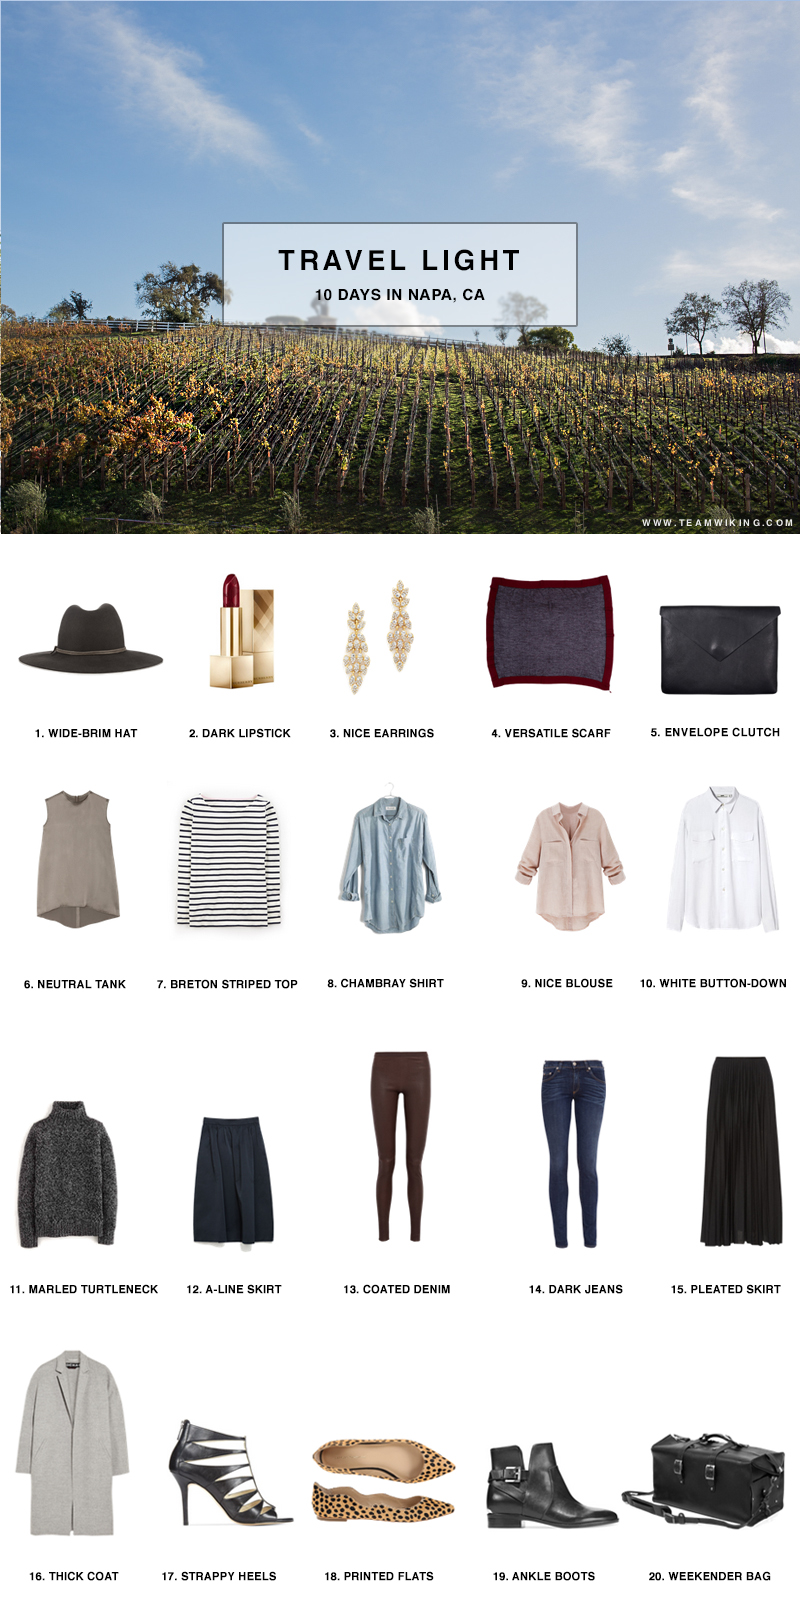 Pack for 10 Days in Napa, California - Shopping list and outfits!